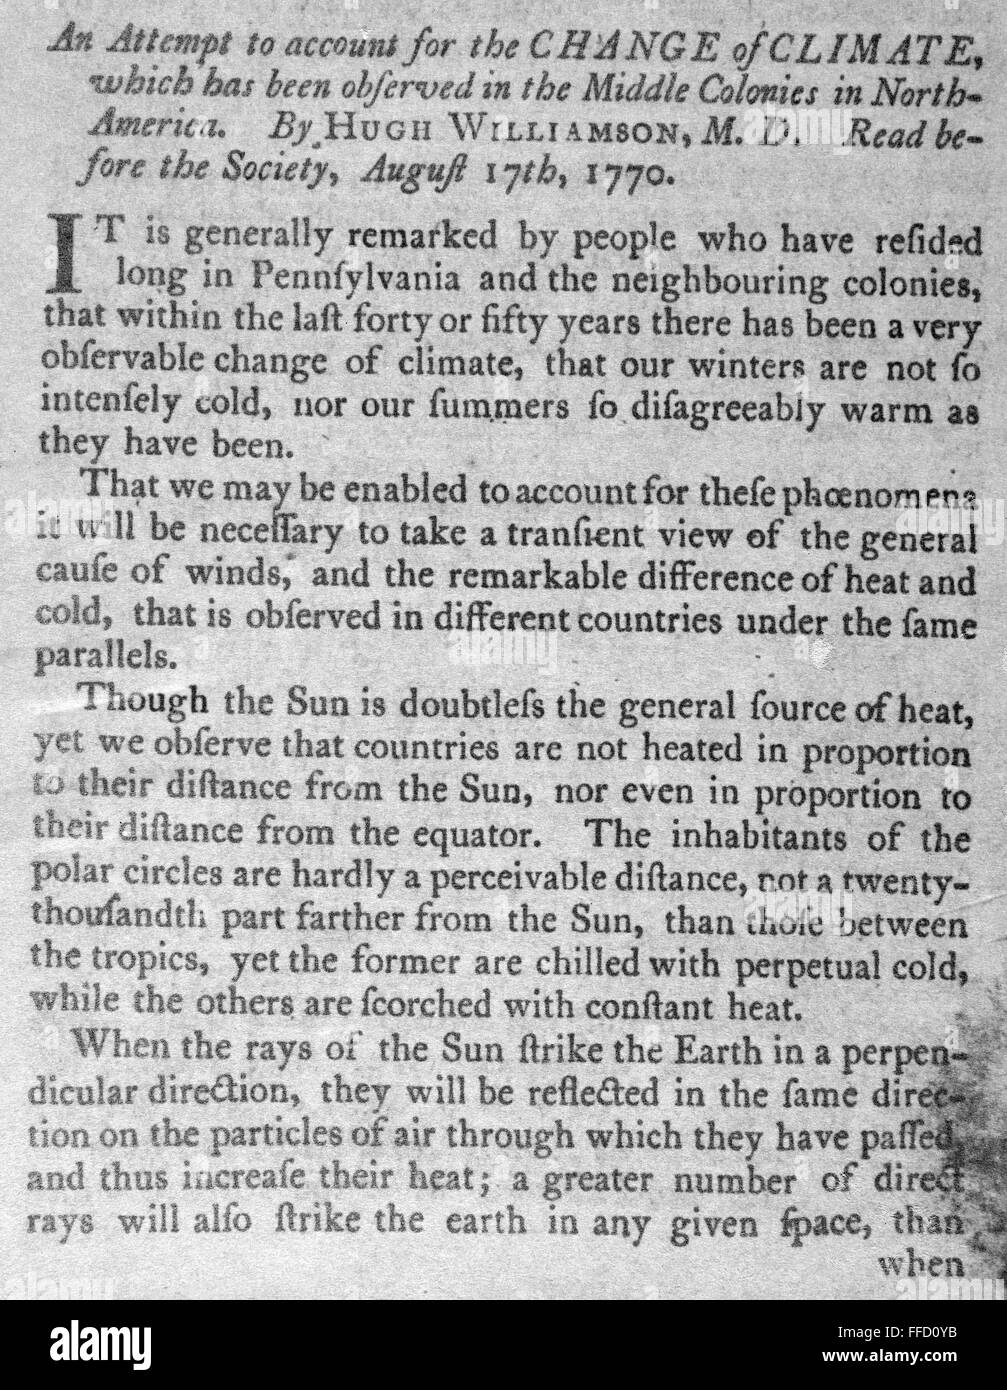 CLIMATE CHANGE, 1770. /nAn attempt to account for the change of climate in the Middle Colonies. The begining of a paper read before the American Philosophical Society, 1770. Stock Photo